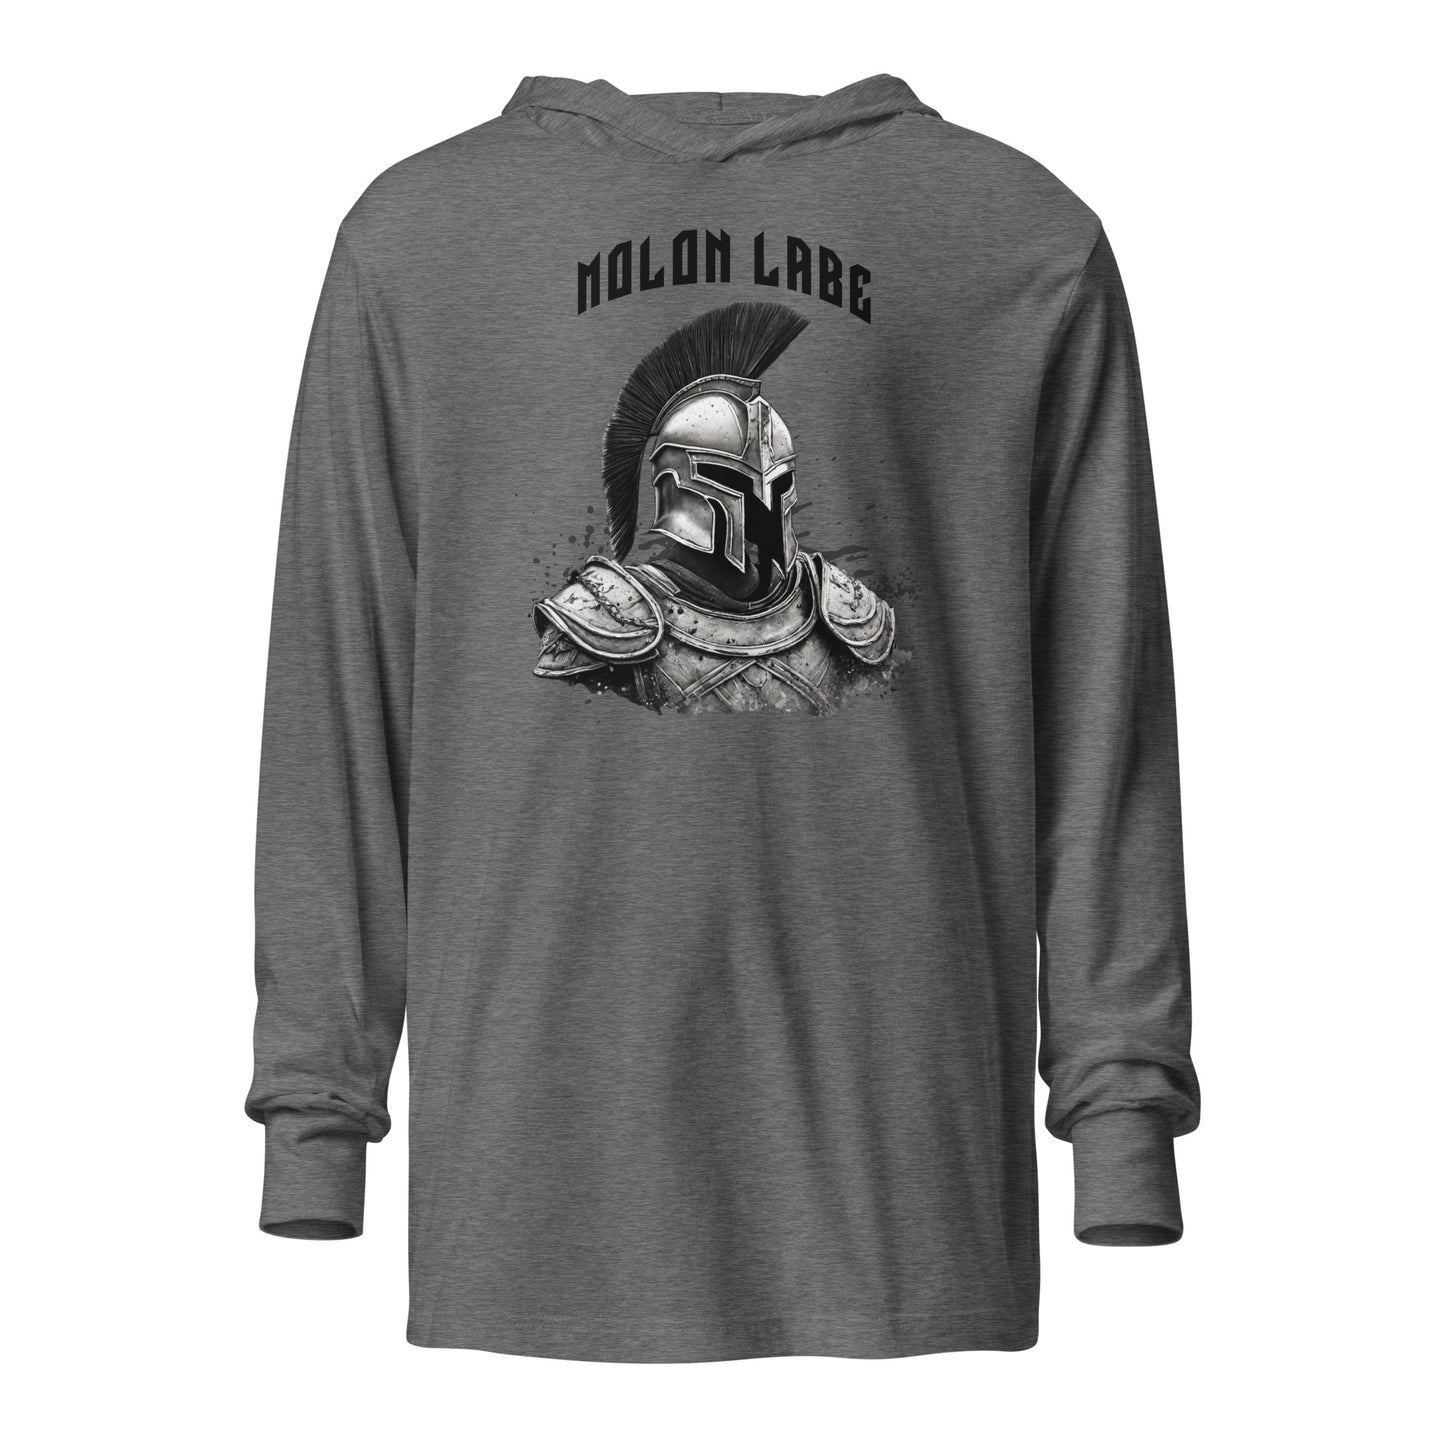 Molon Labe Spartan Graphic Hooded Long-Sleeve Tee Grey Triblend